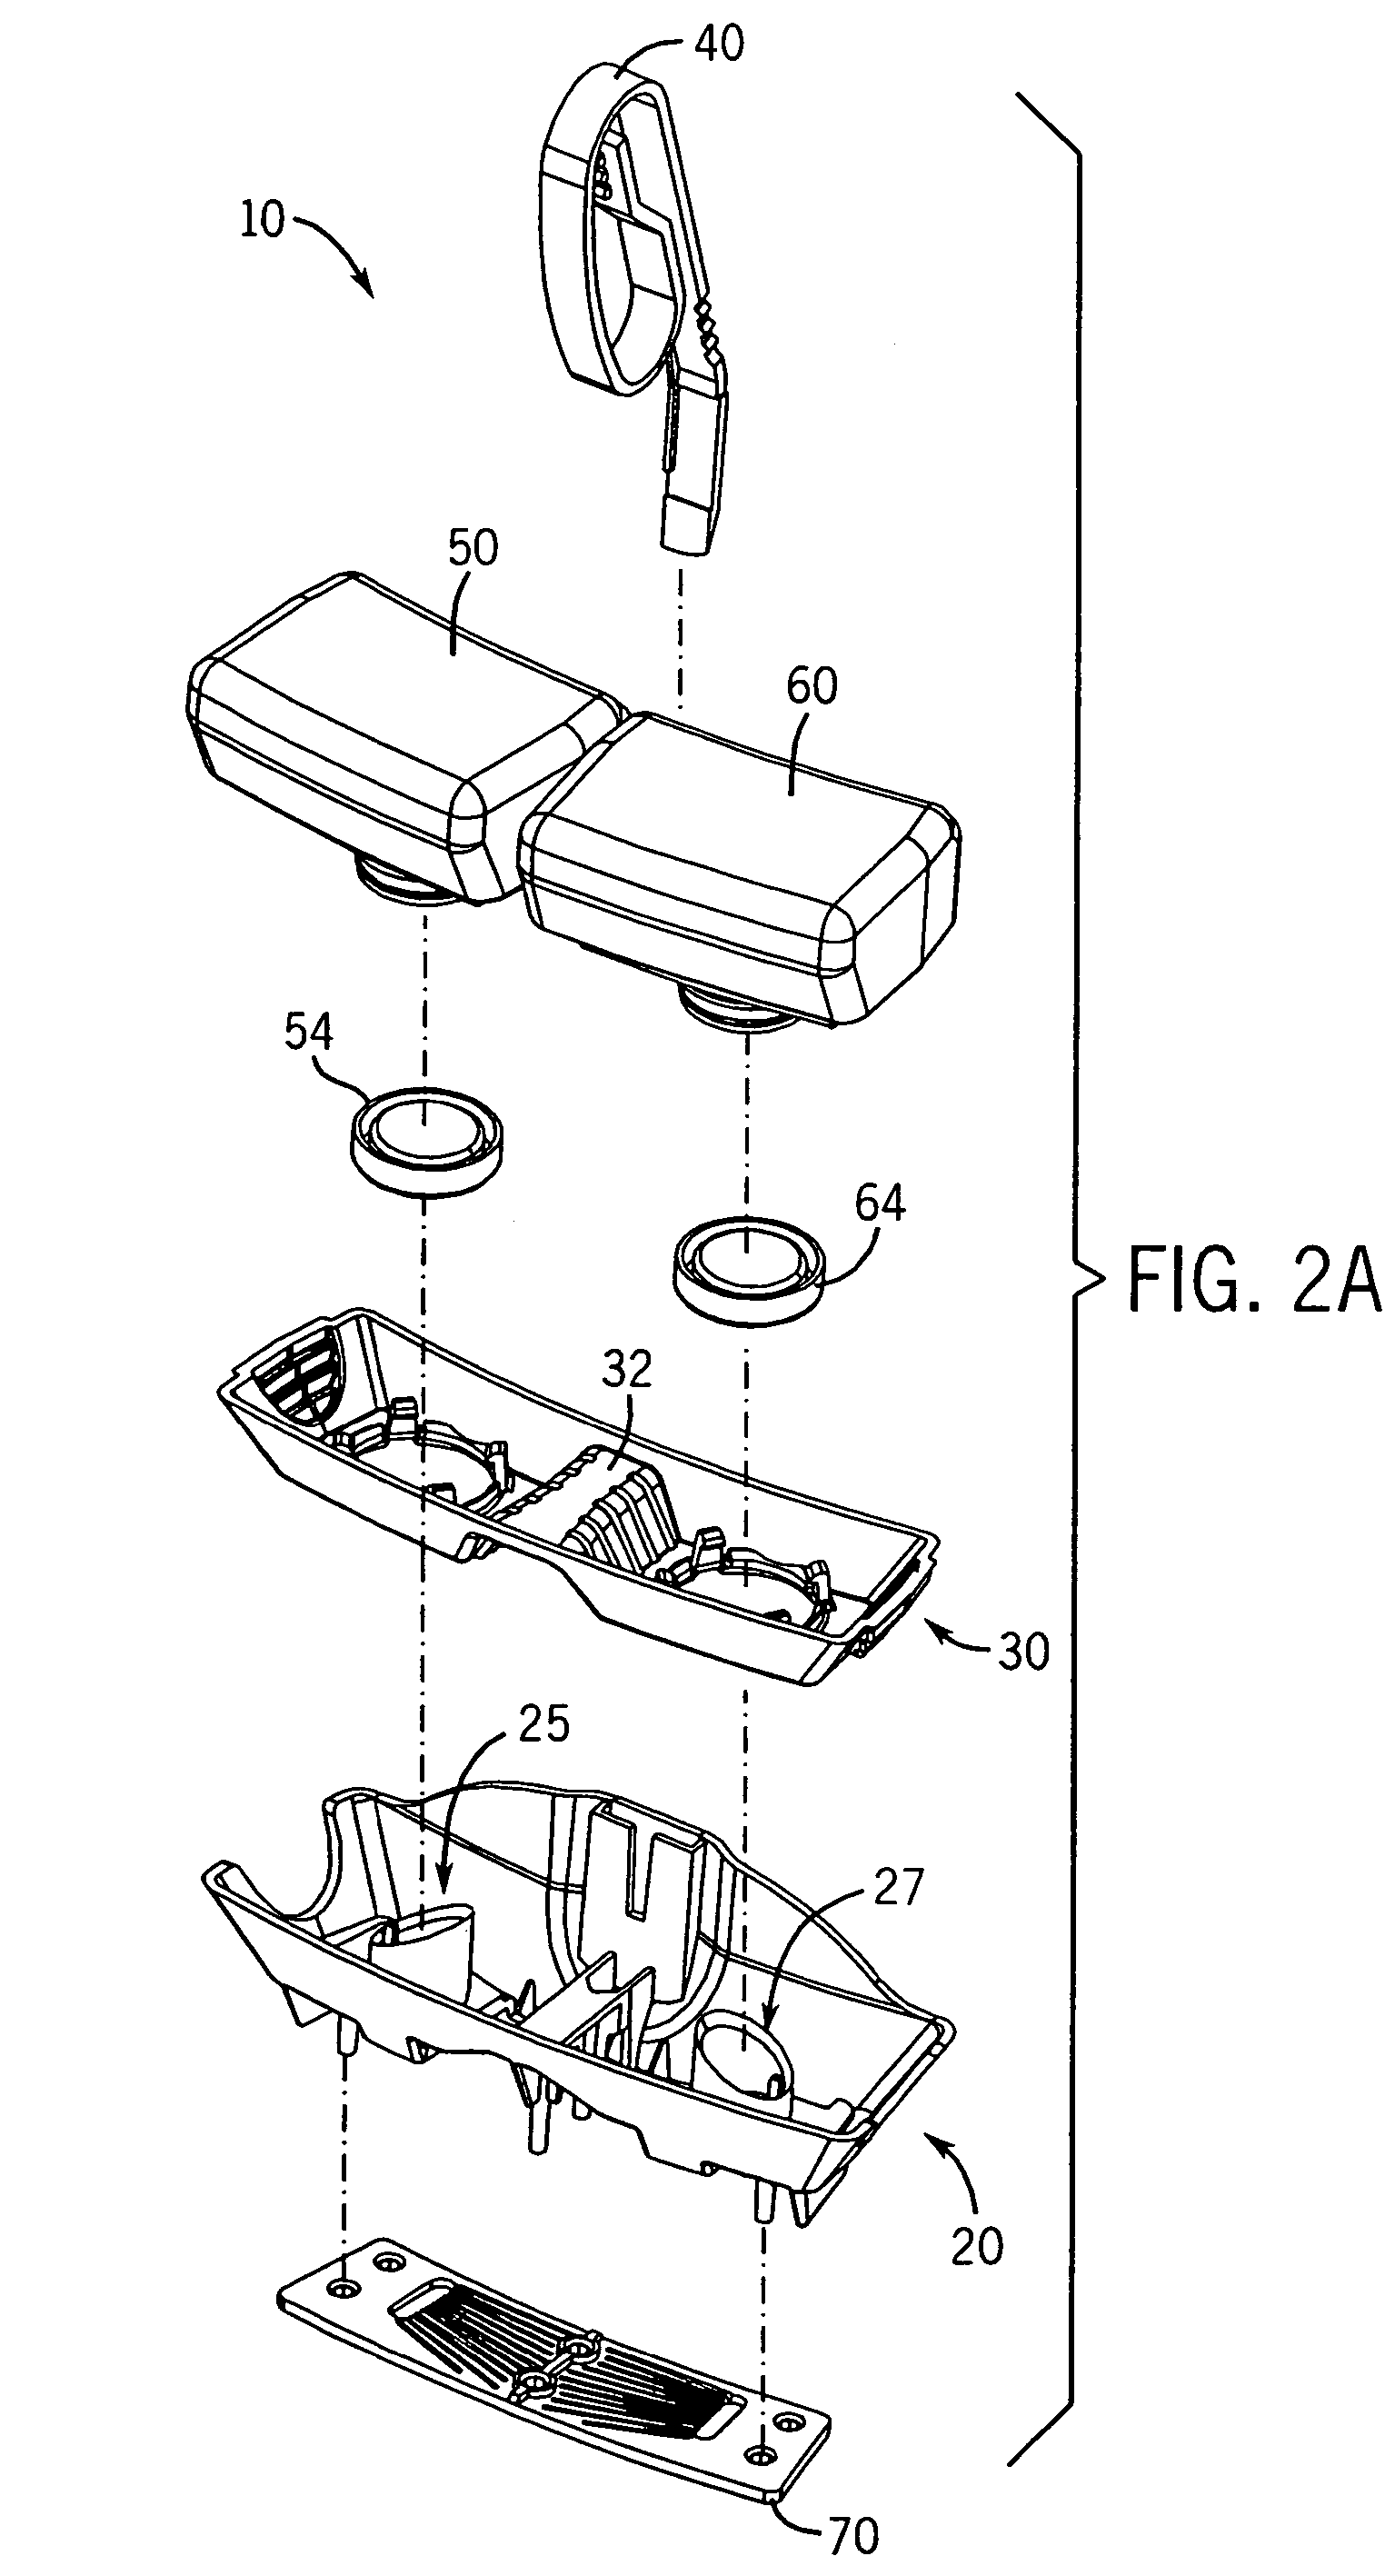 Toilet rim mounted device for dispensing two liquids